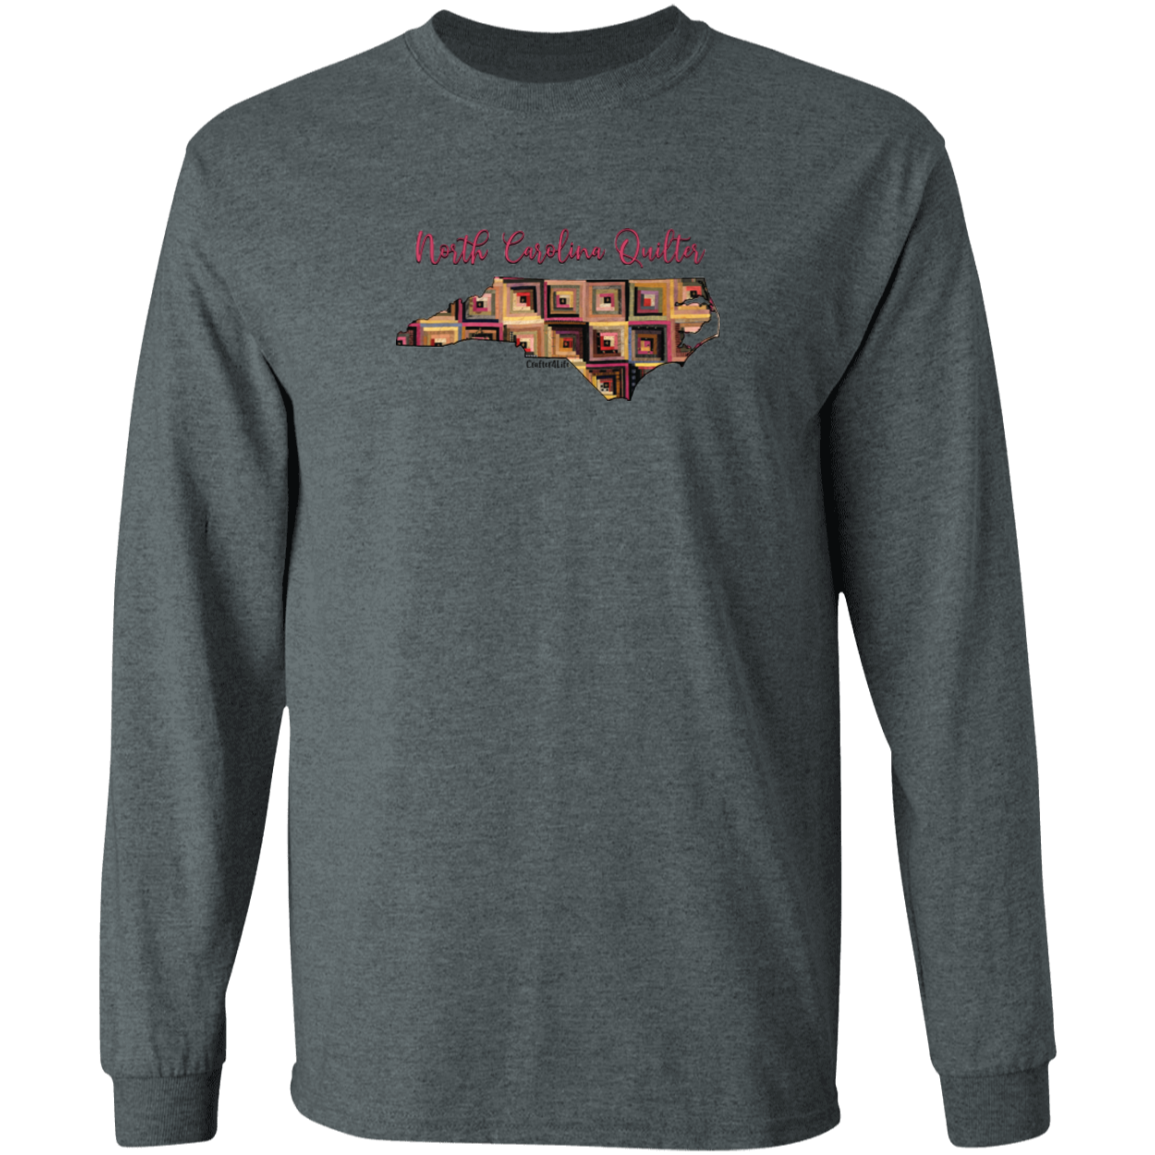 North Carolina Quilter Long Sleeve T-Shirt, Gift for Quilting Friends and Family